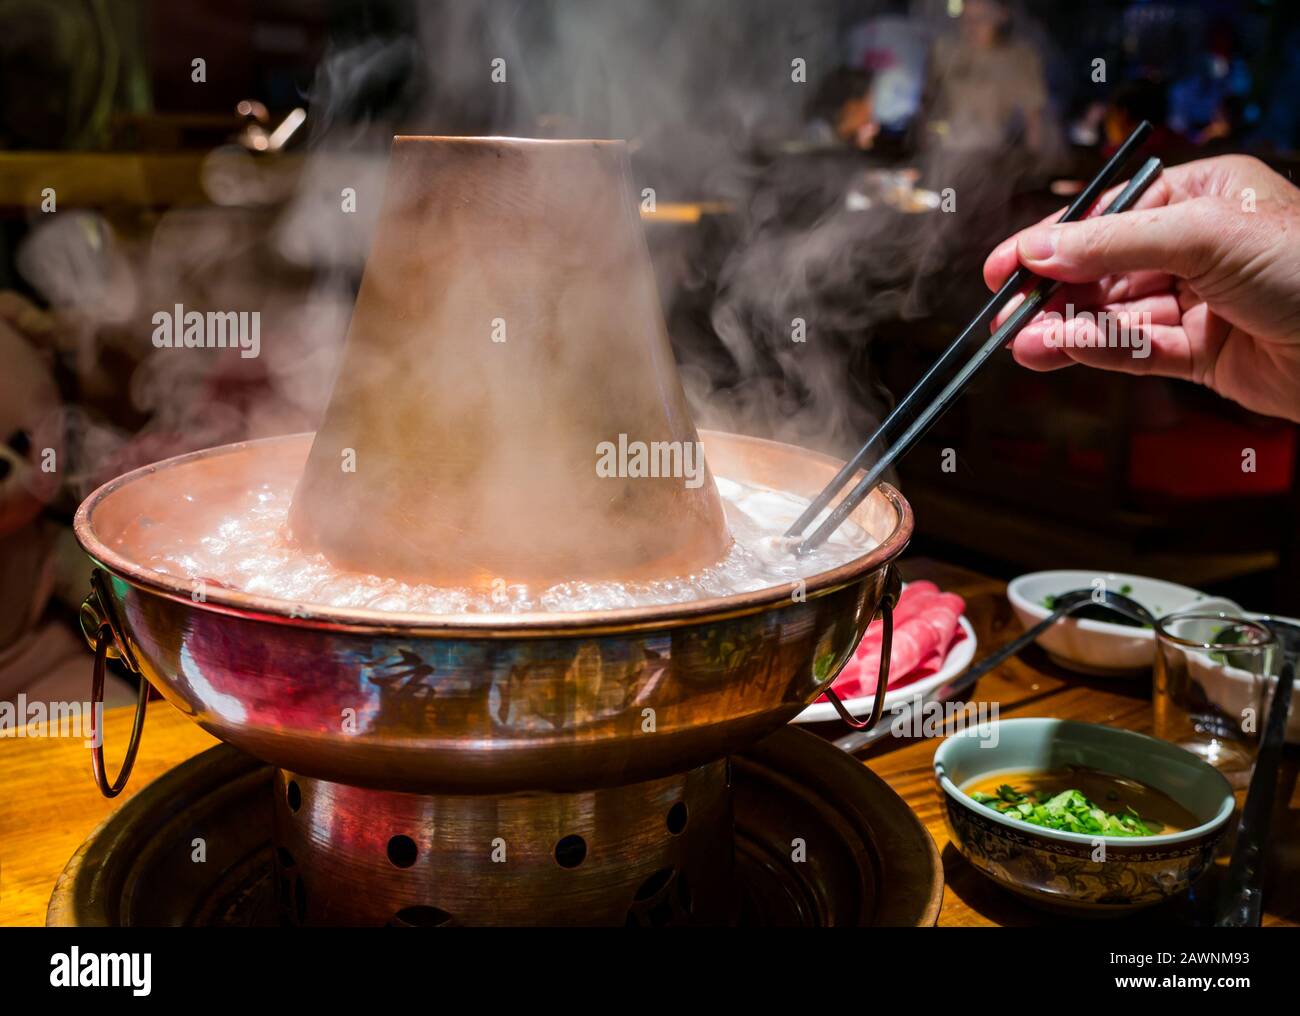 Mongolian hotpot with meat slices served at restaurant table, Xi Cheng Hutong District, Beijing, China, Asia Stock Photo